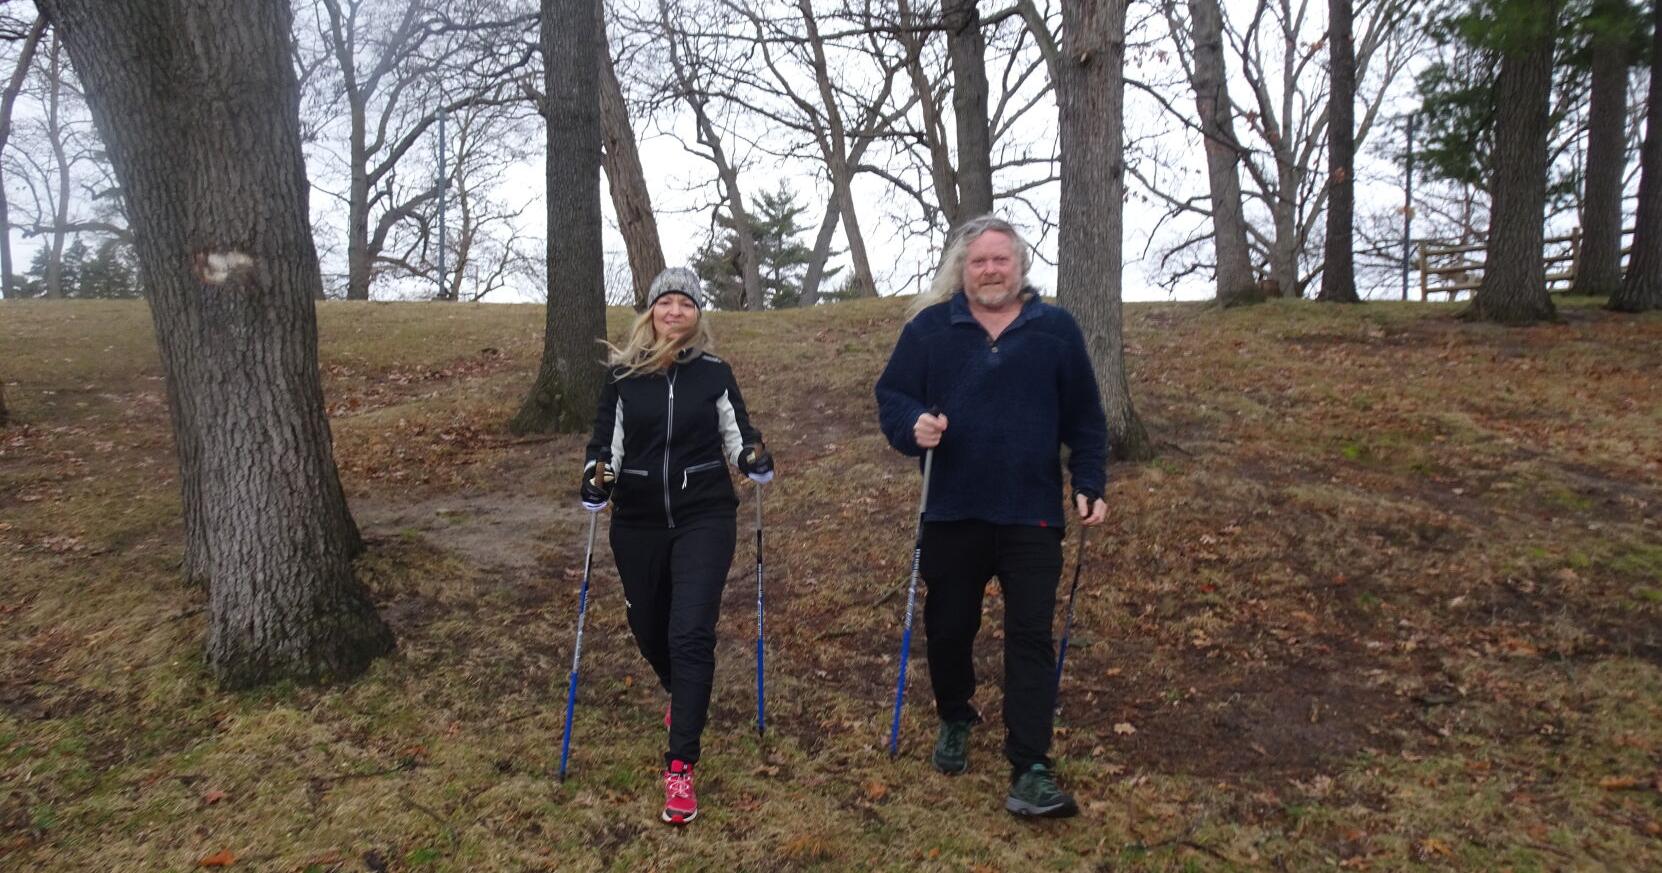 On the Trails: Scant snow prompts 'ski walking'